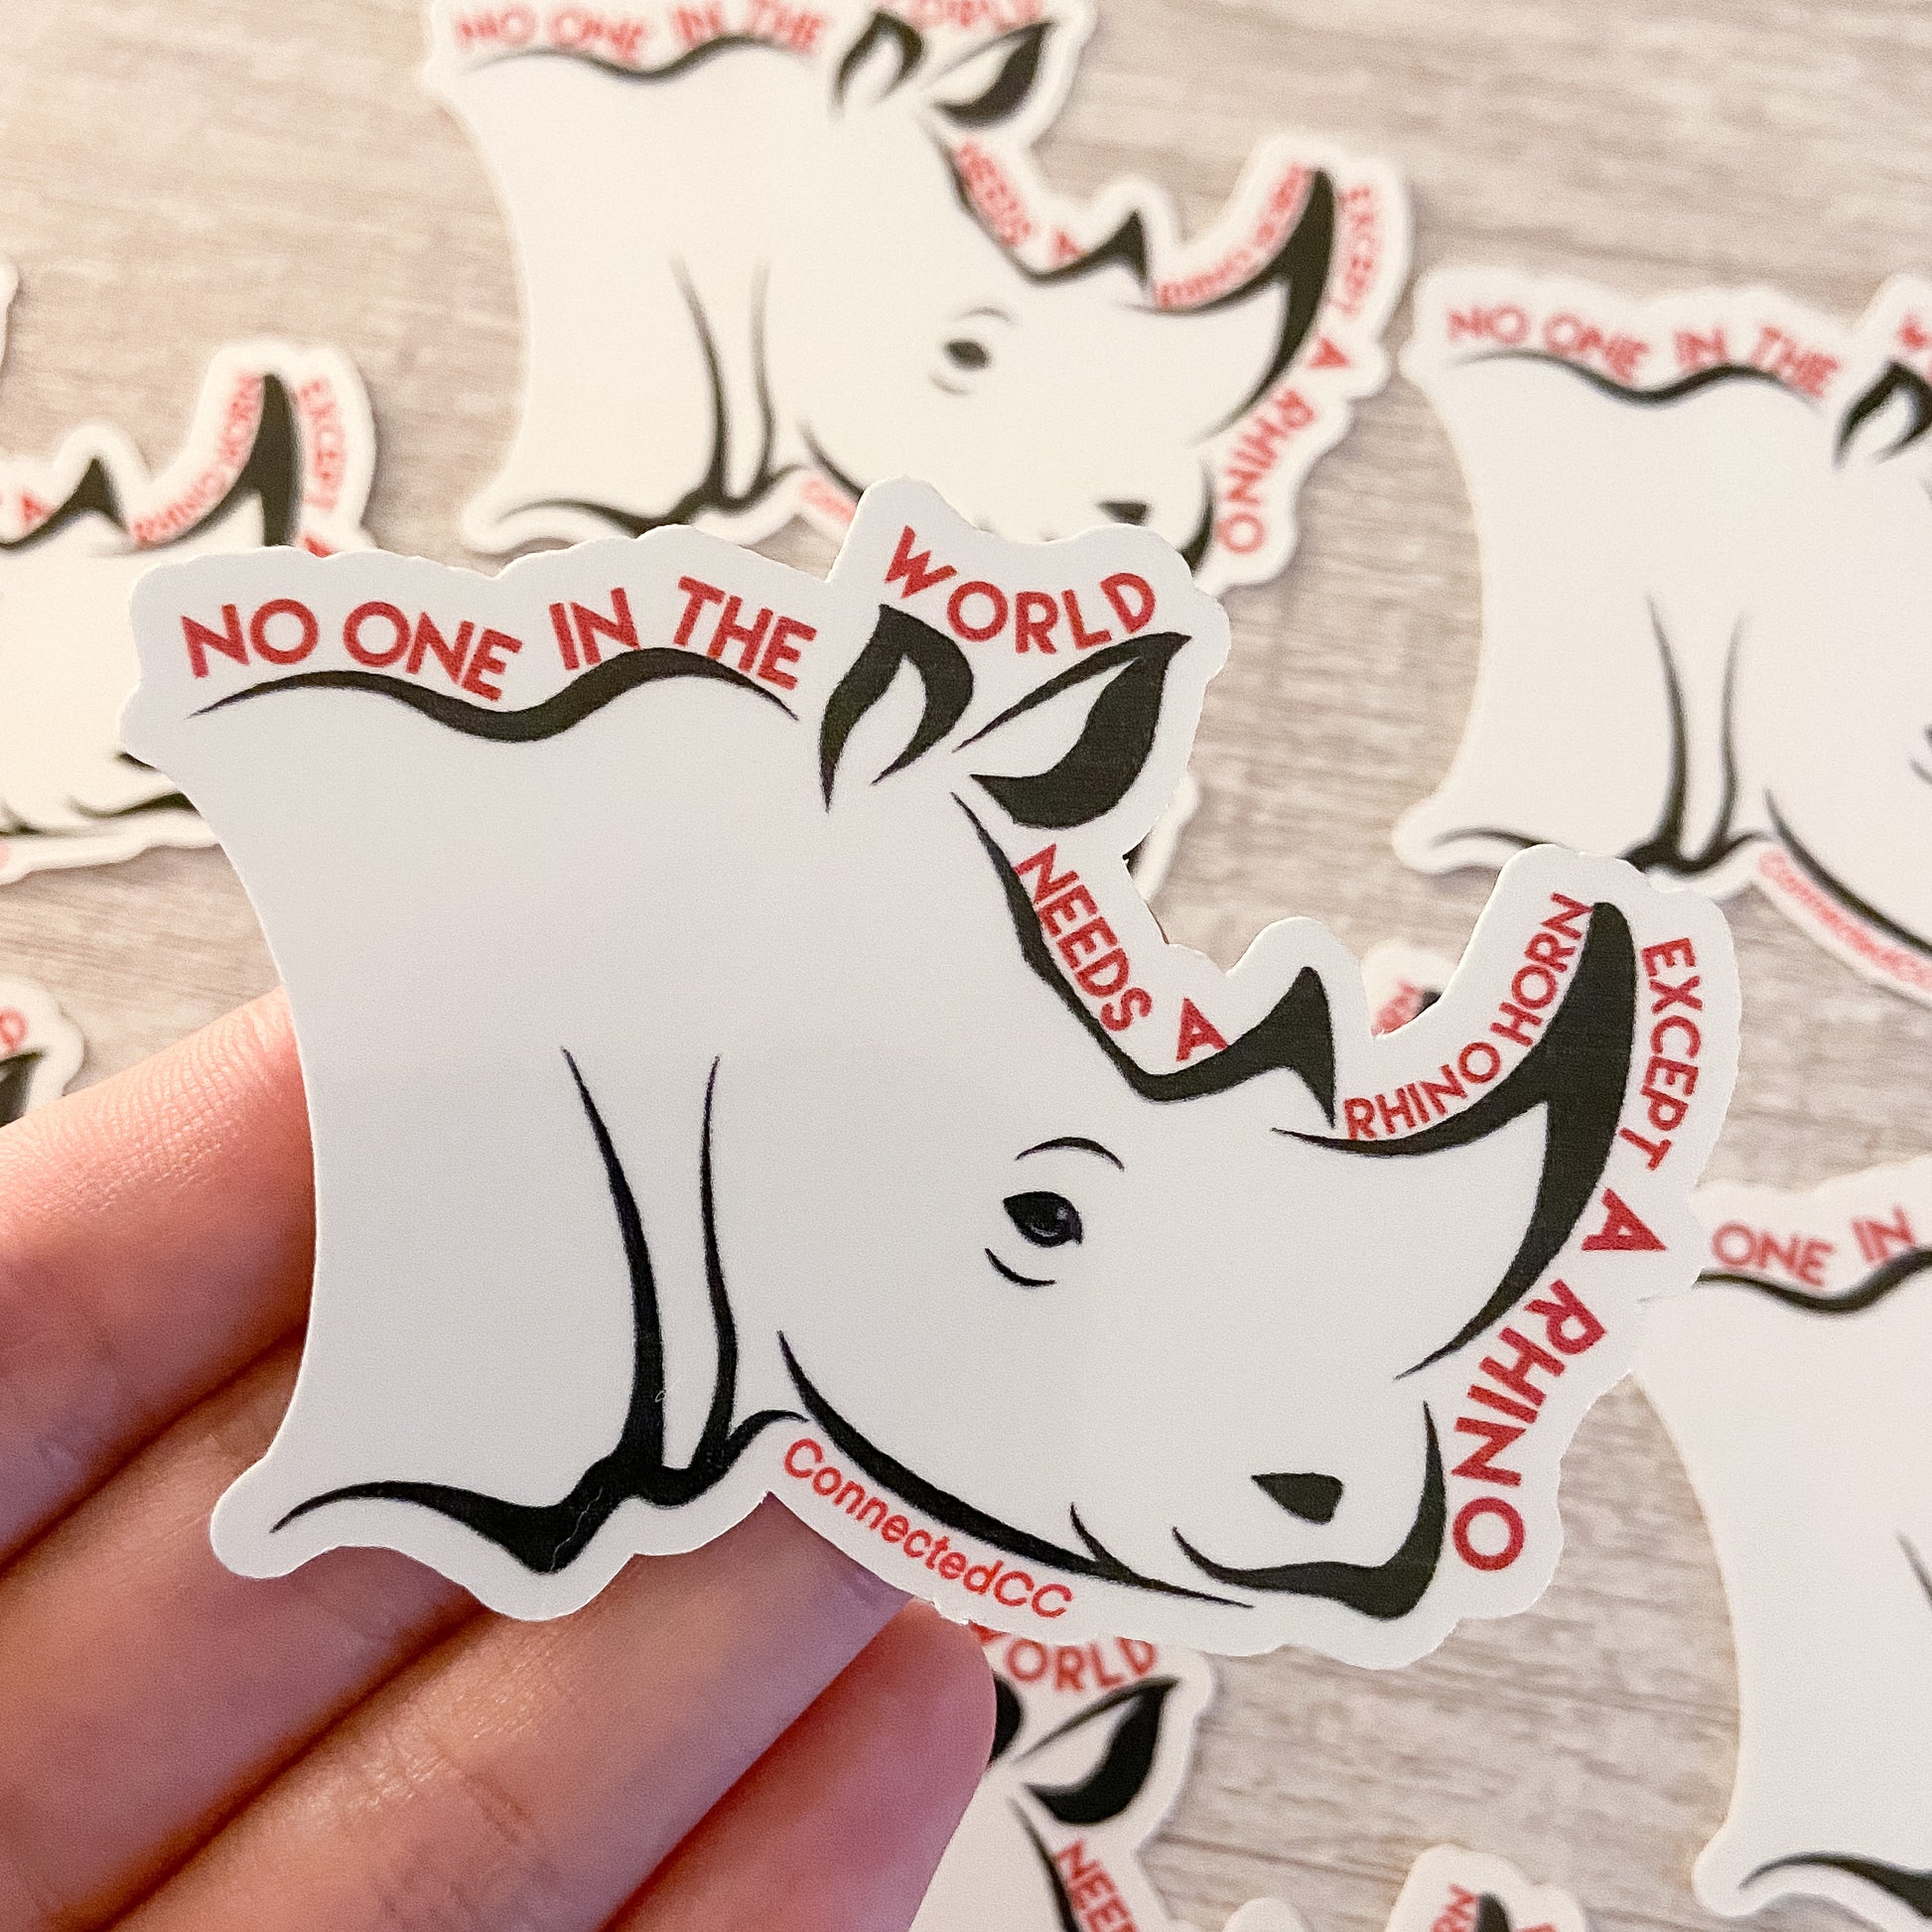 White No One Needs A Rhino Horn Sticker reads "No One In The World Needs A Rhino Horn Except A Rhino" - sweetsherriloudesigns - Ethically and Sustainably Made - 10% donated to Save The Rhino International